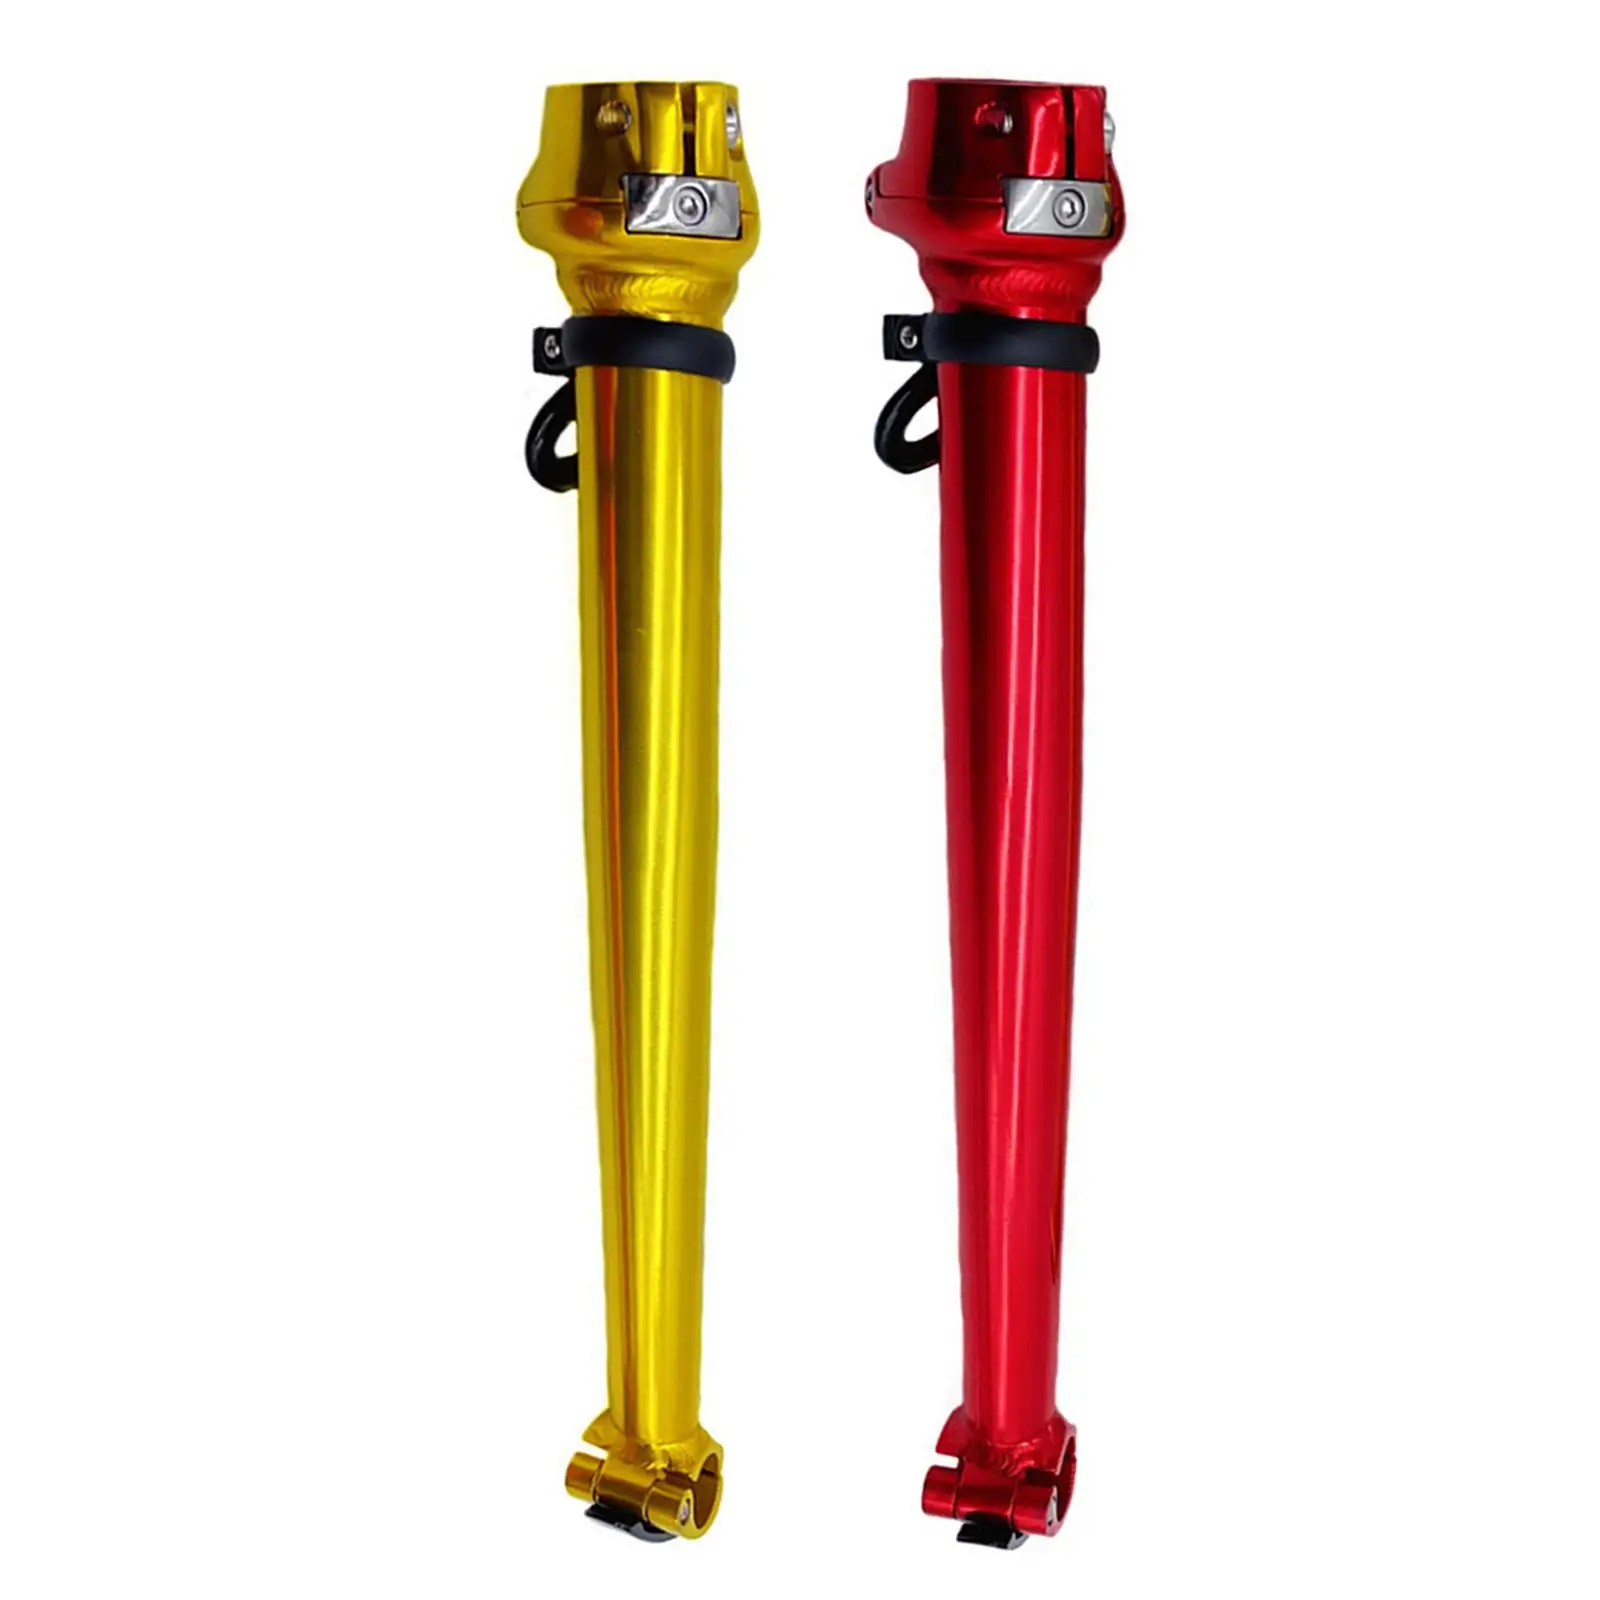 Adjustable Folding Bicycle Handle Bar Stem, Integrated Head Tube, Quick Release Accessories